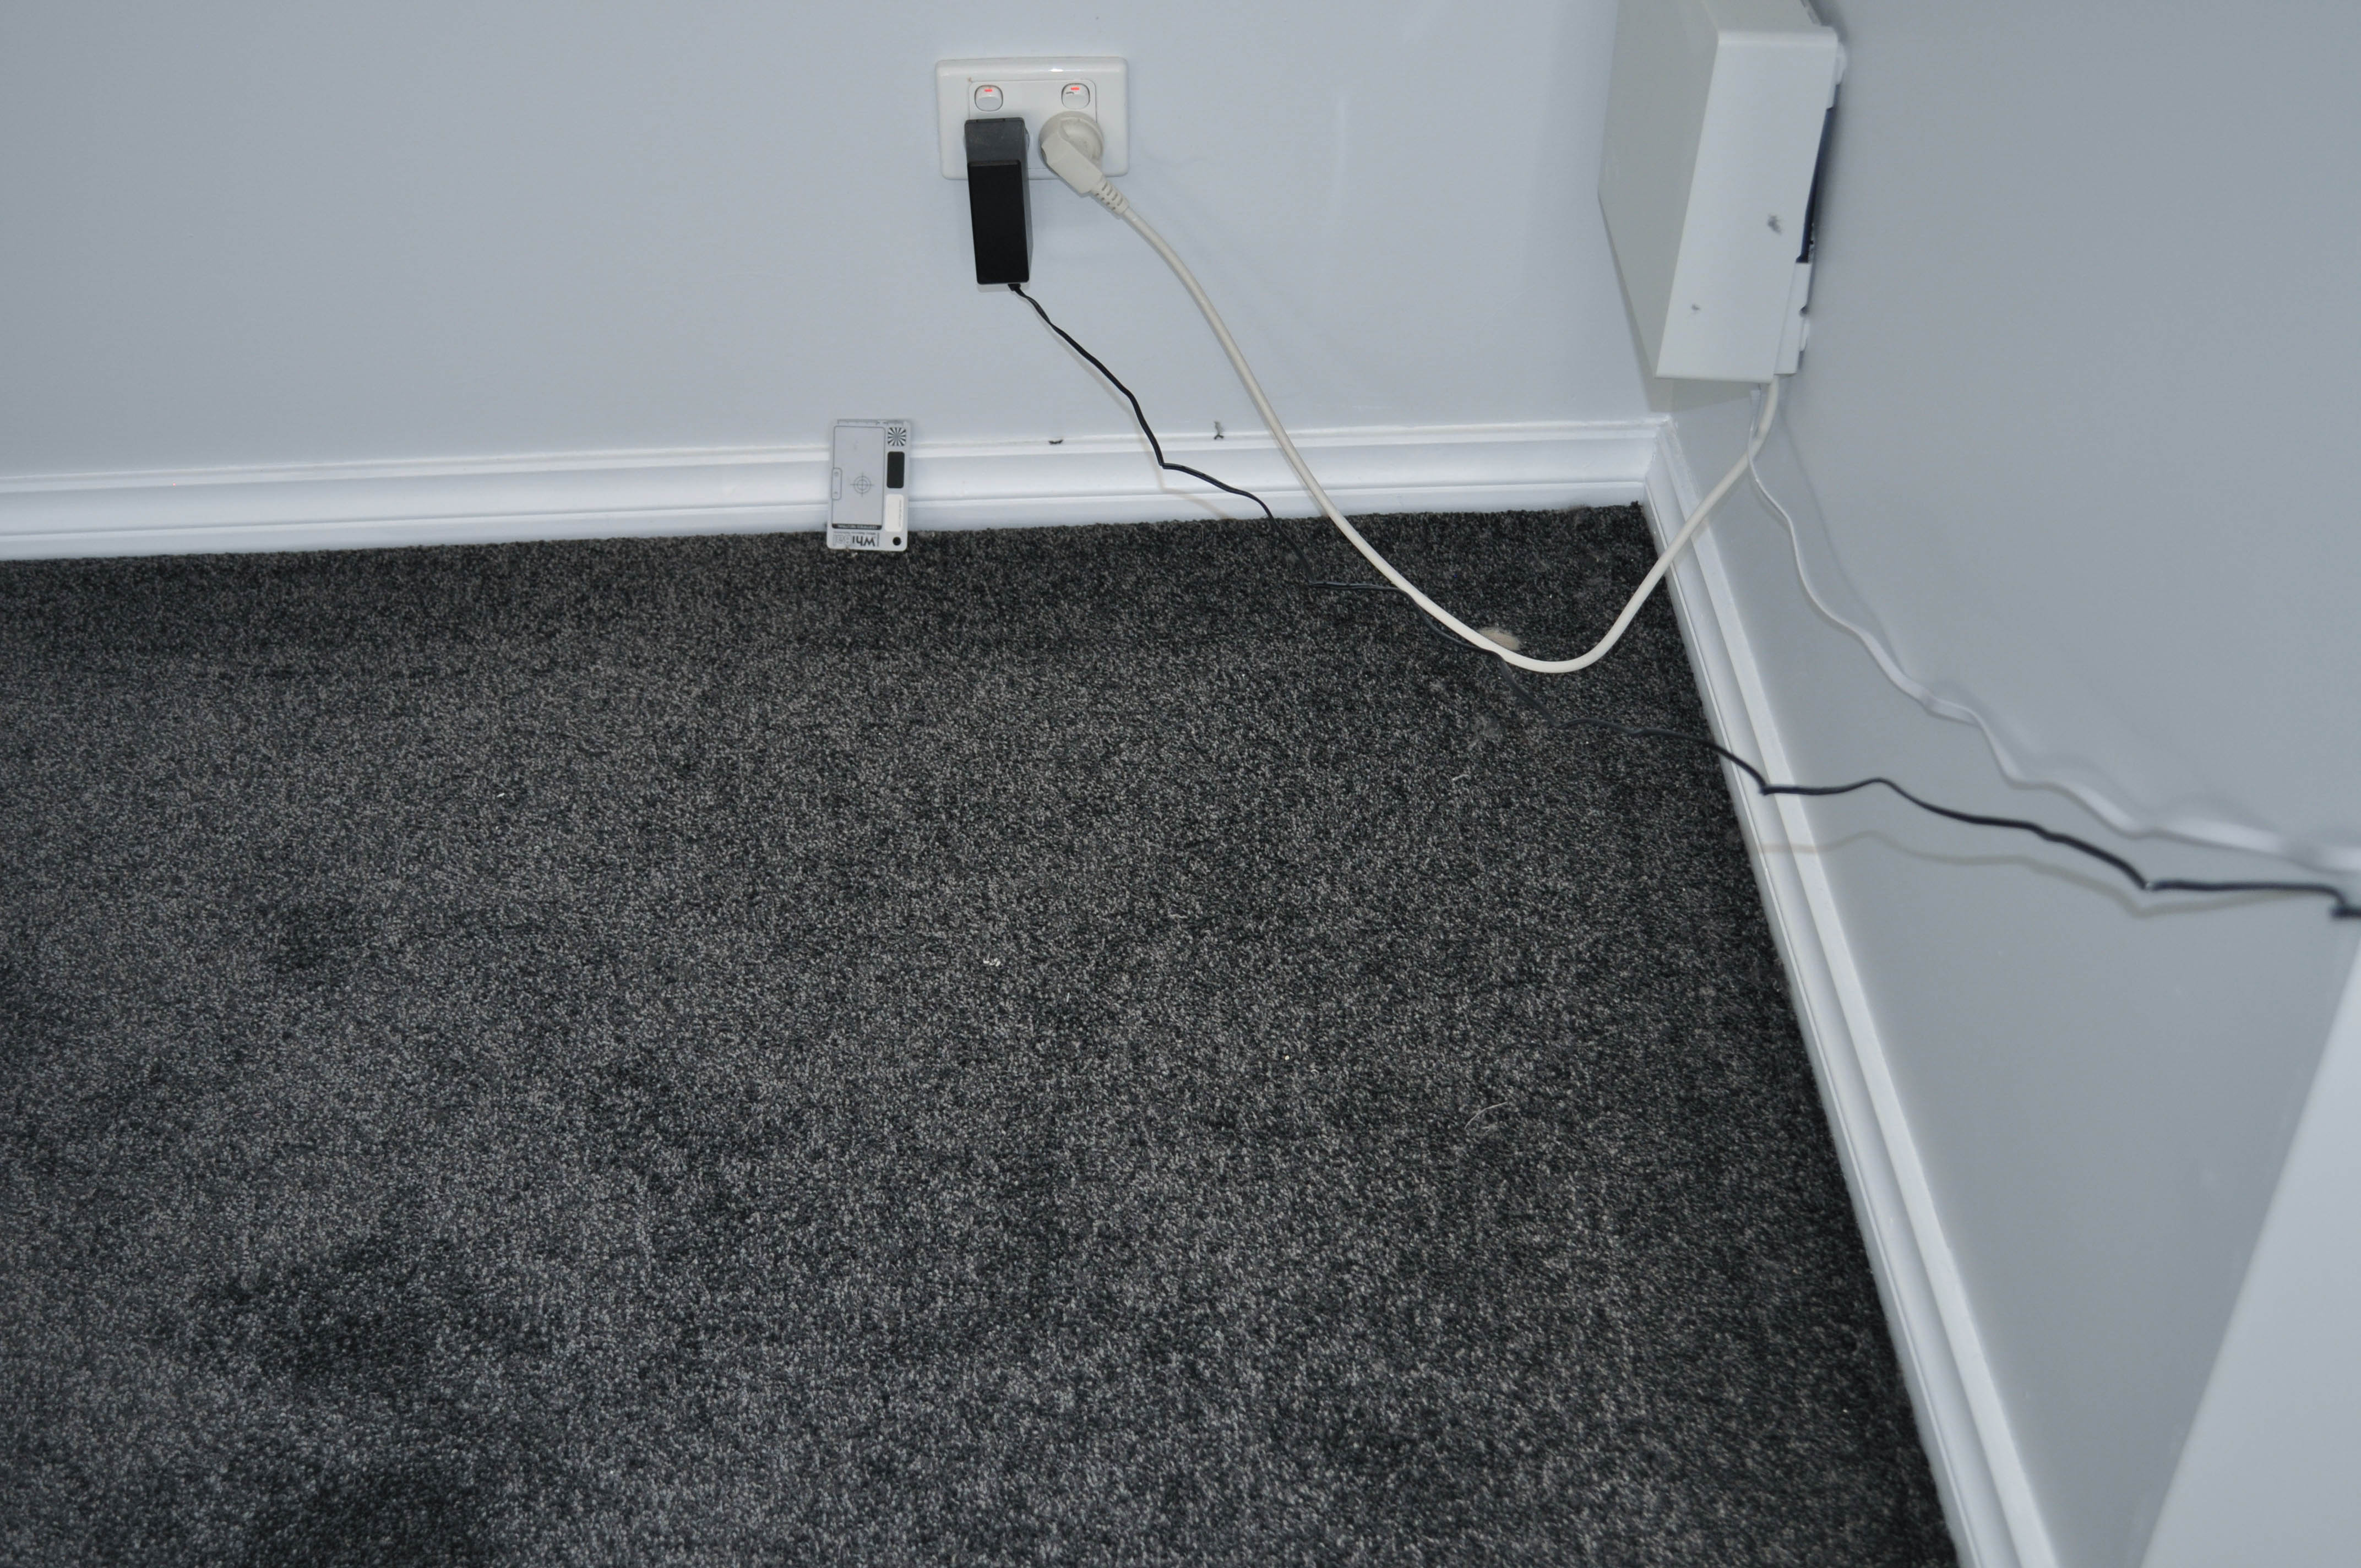 showing a room in a melton house, and it's floor carpeted by a, black coloured twist pile, polyester yarn carpet, installed by Concord Floors.